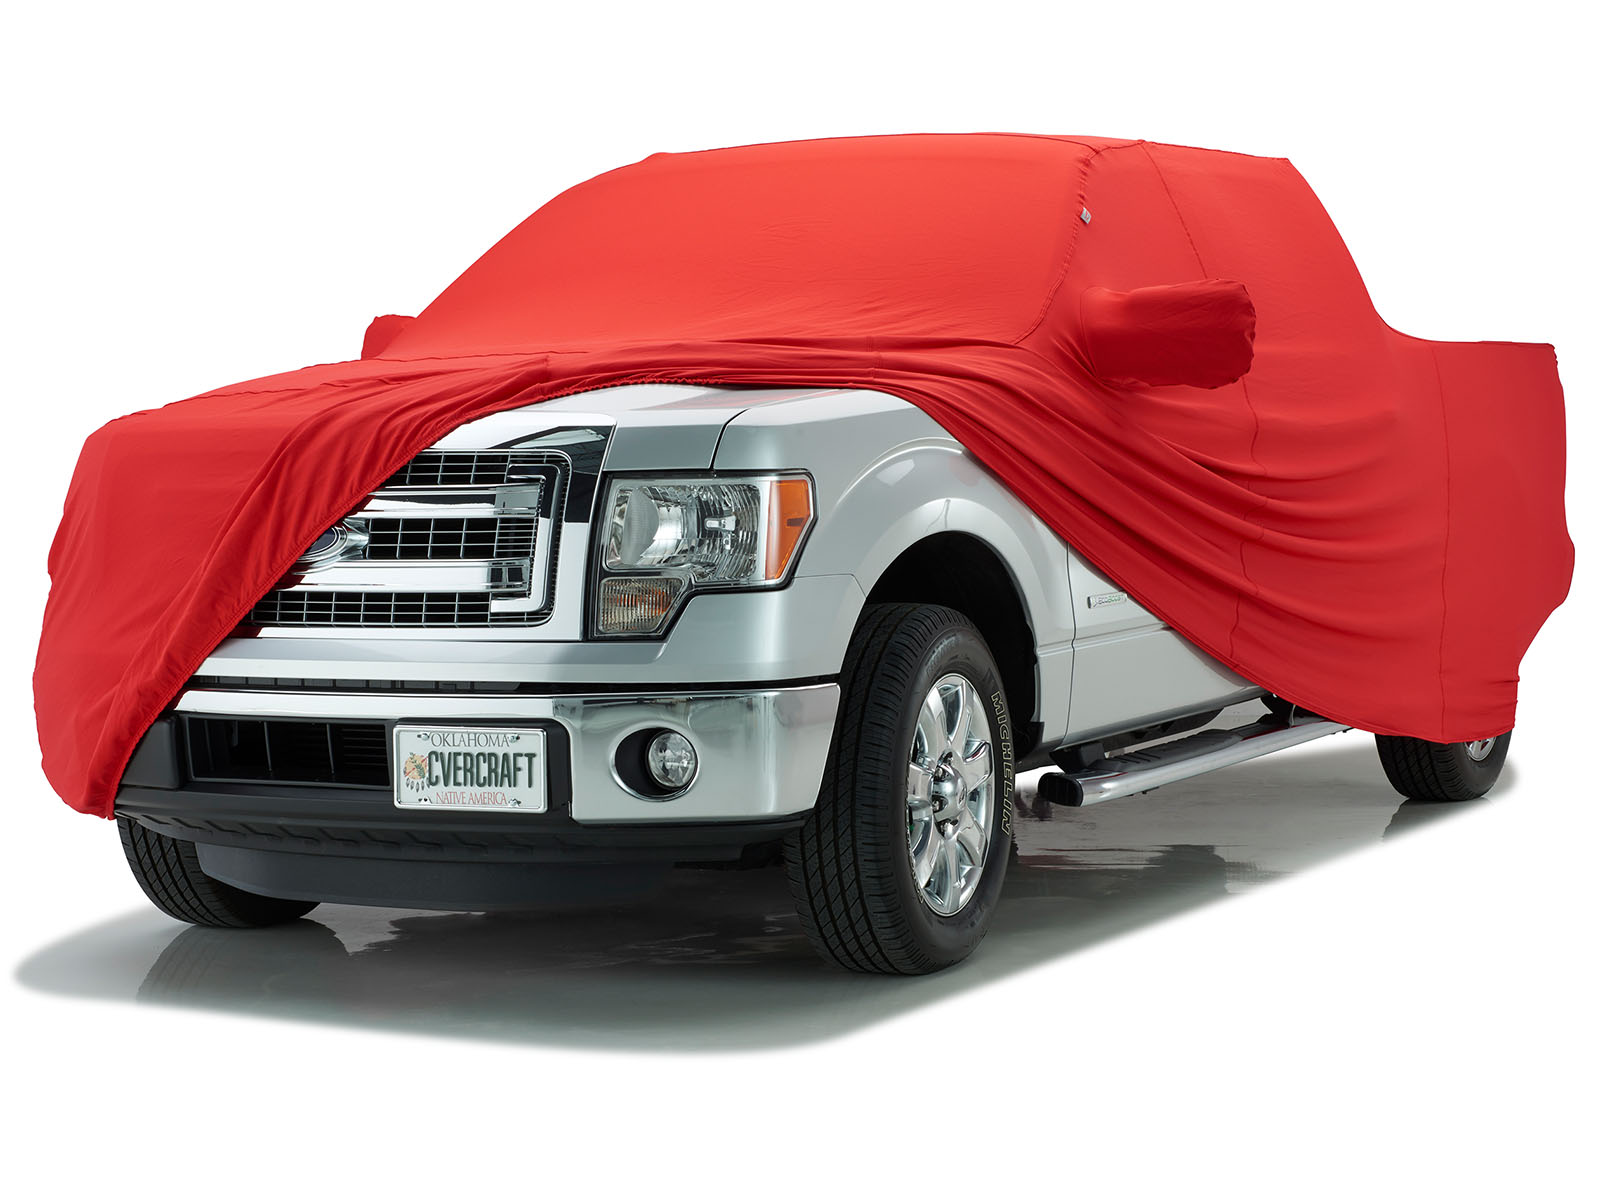 Car Covers for Trucks, Jeeps, and SUVs RealTruck